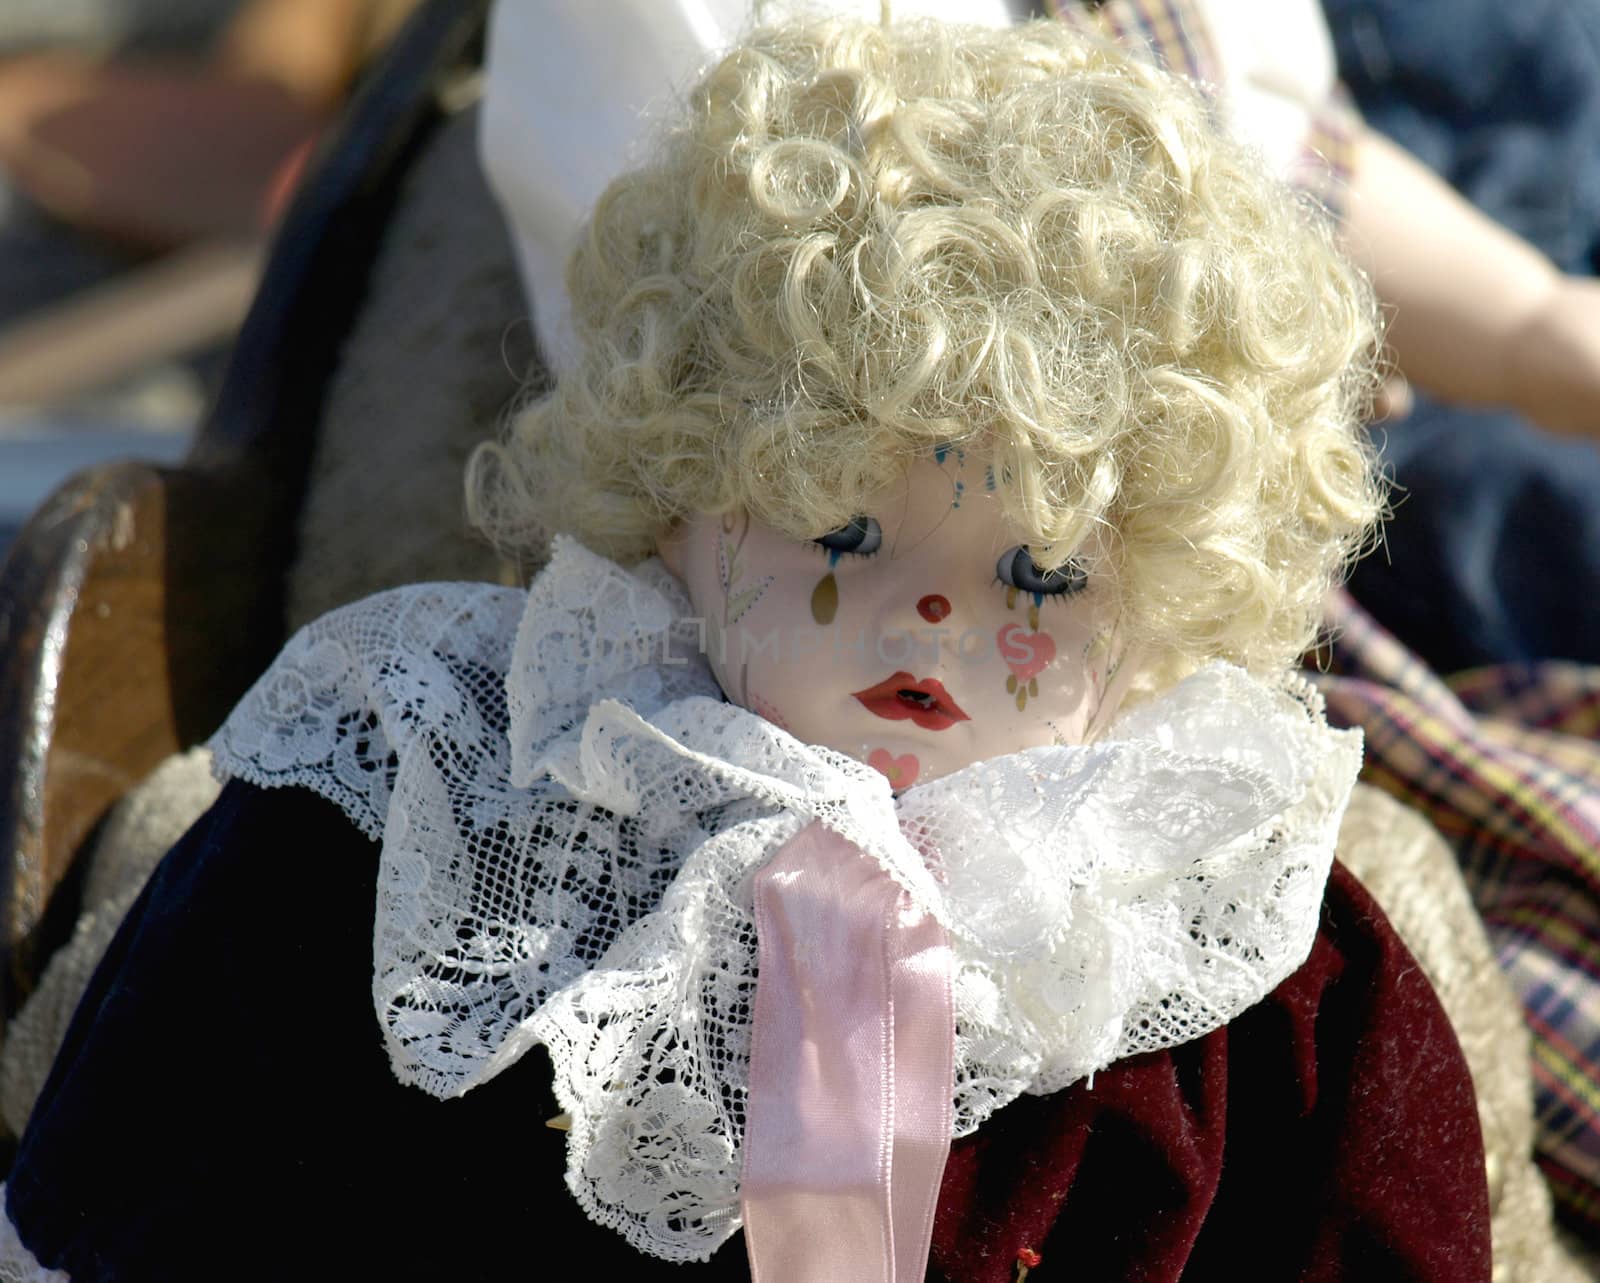 Old doll by pm29